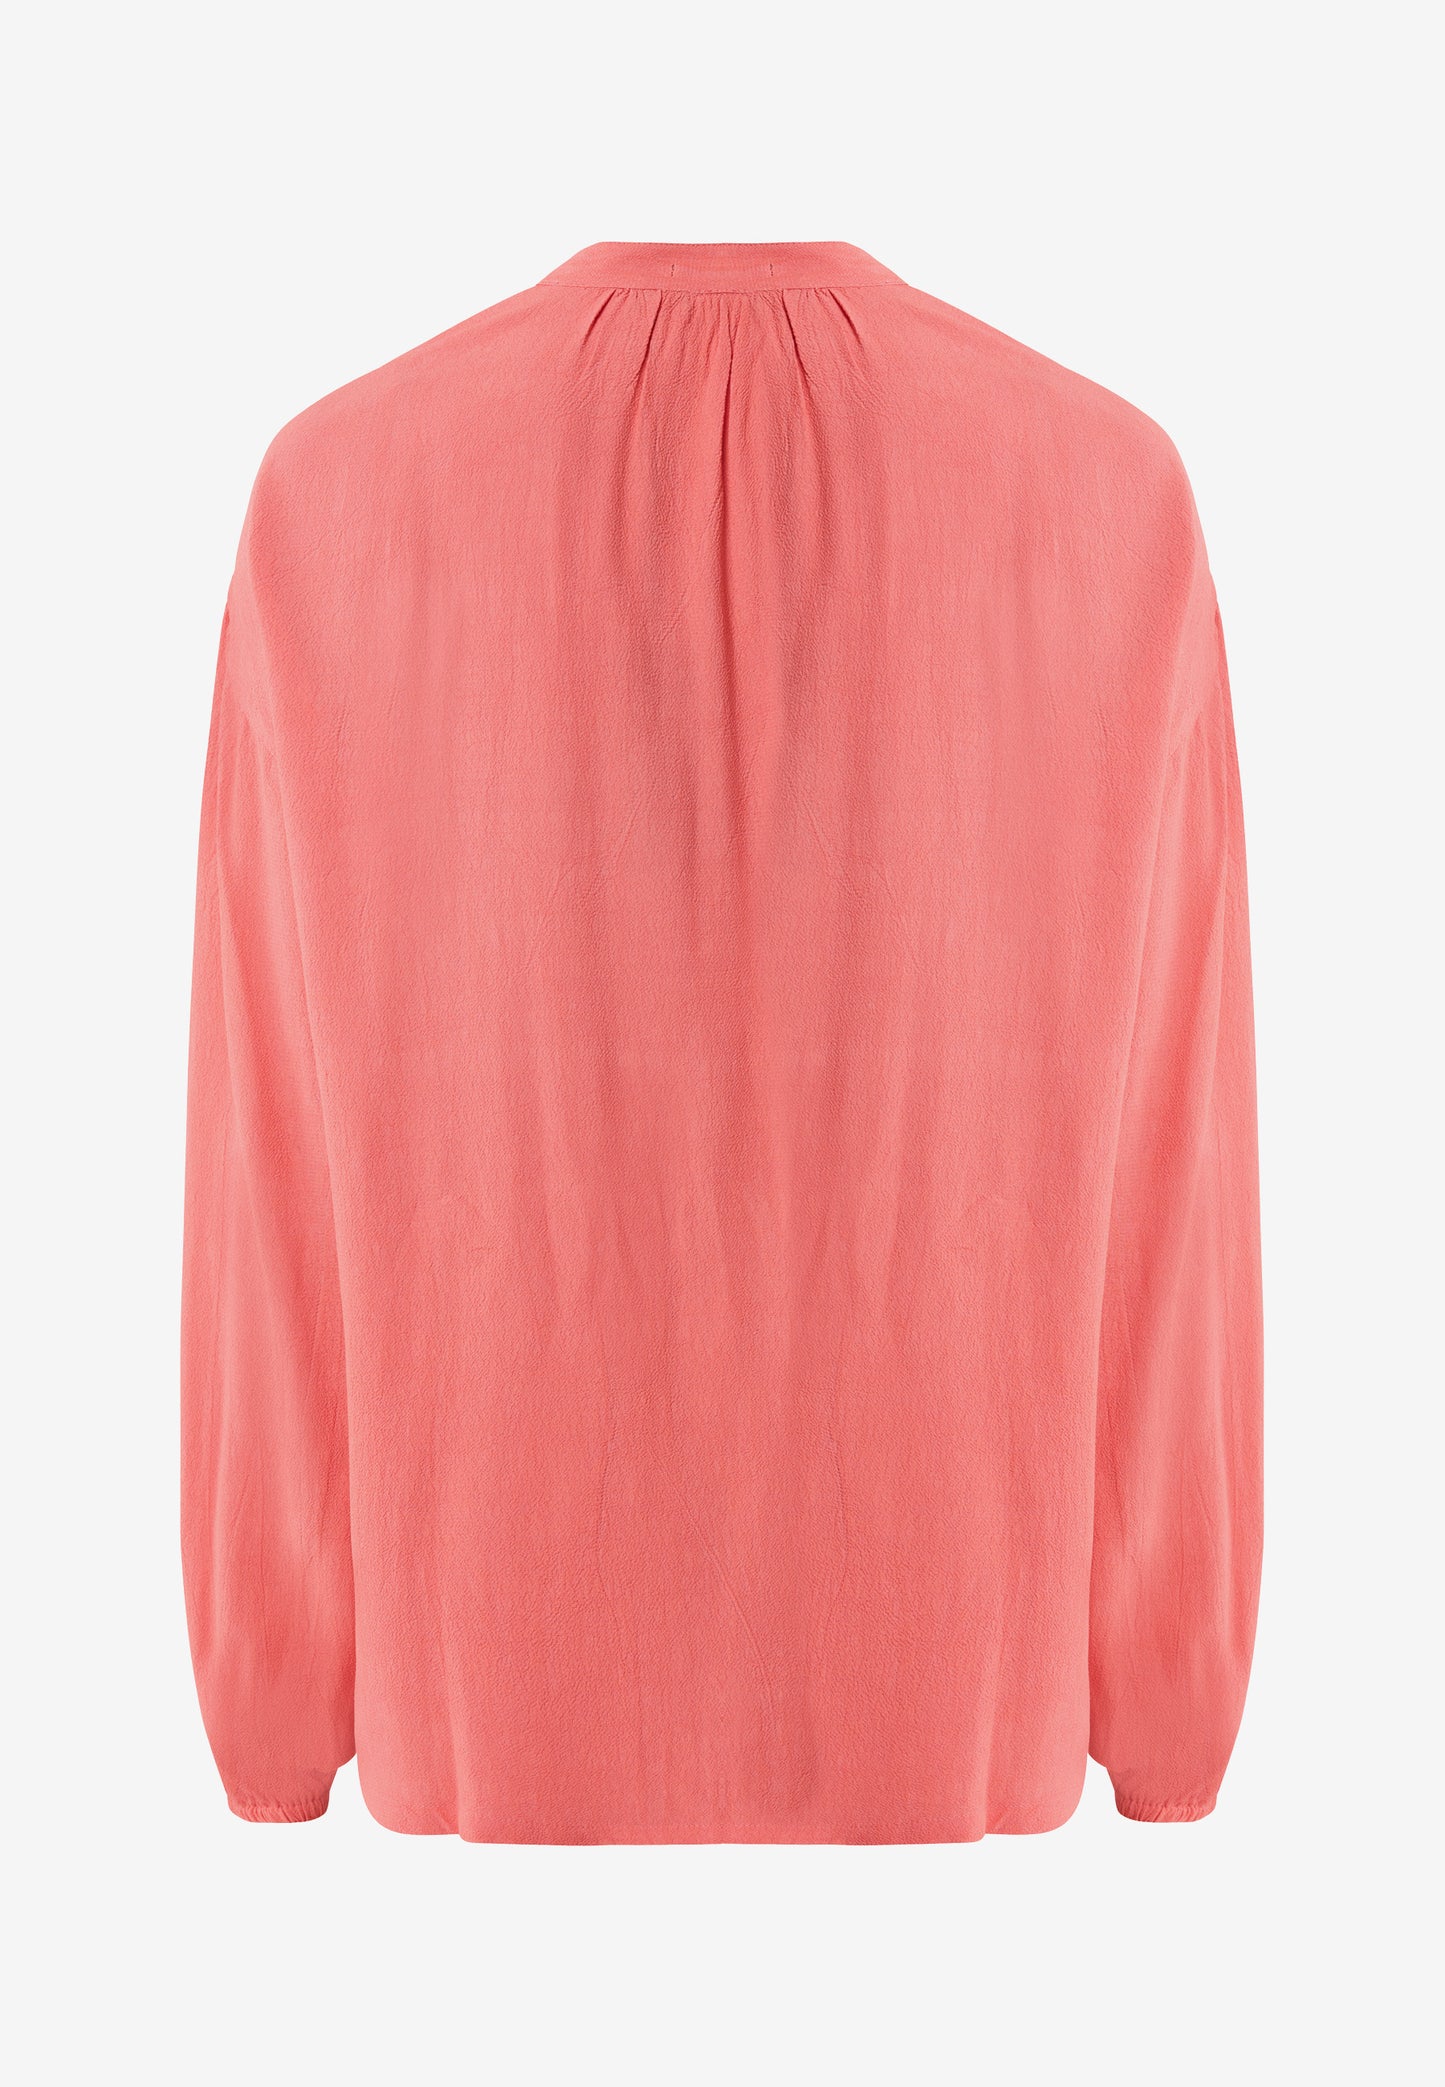 Plain Blouse with Gathered Sleeves